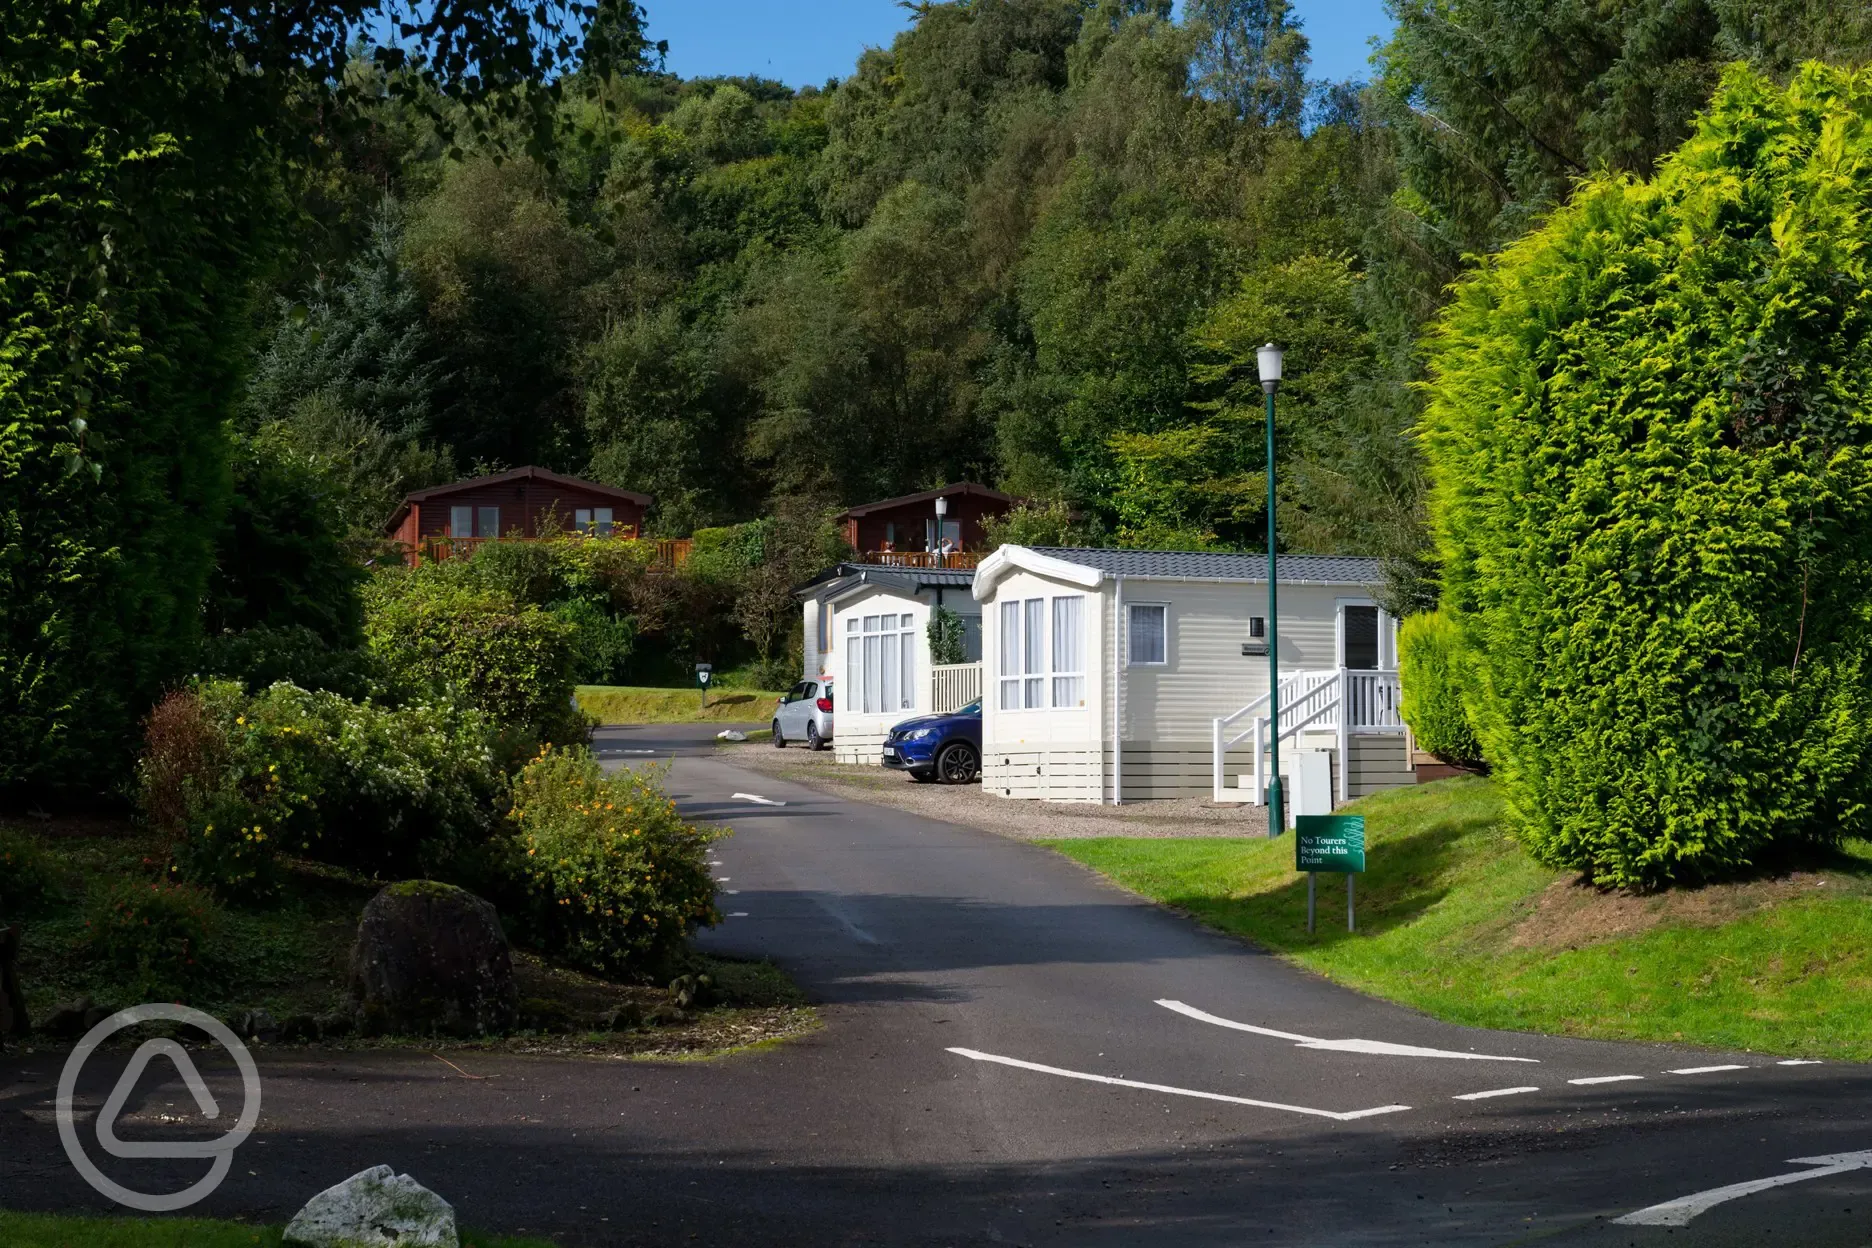 Holiday Home Ownership at Lomond Woods, Loch Lomond Lodges